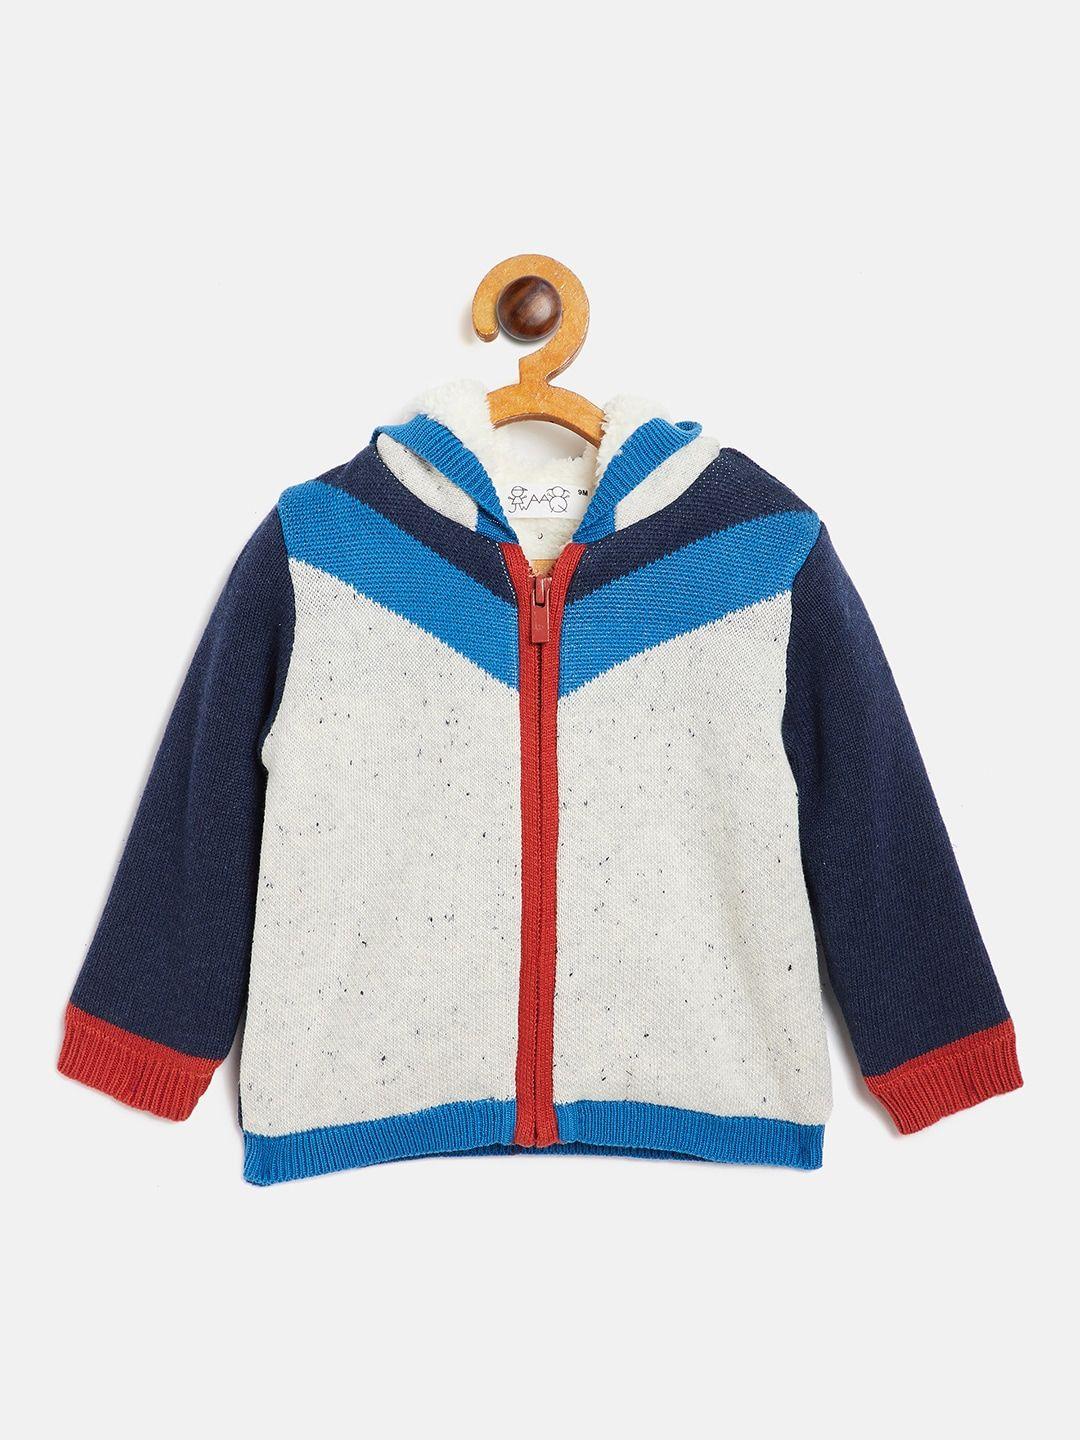 jwaaq kids grey & blue colourblocked pure cotton front-open hooded sweater